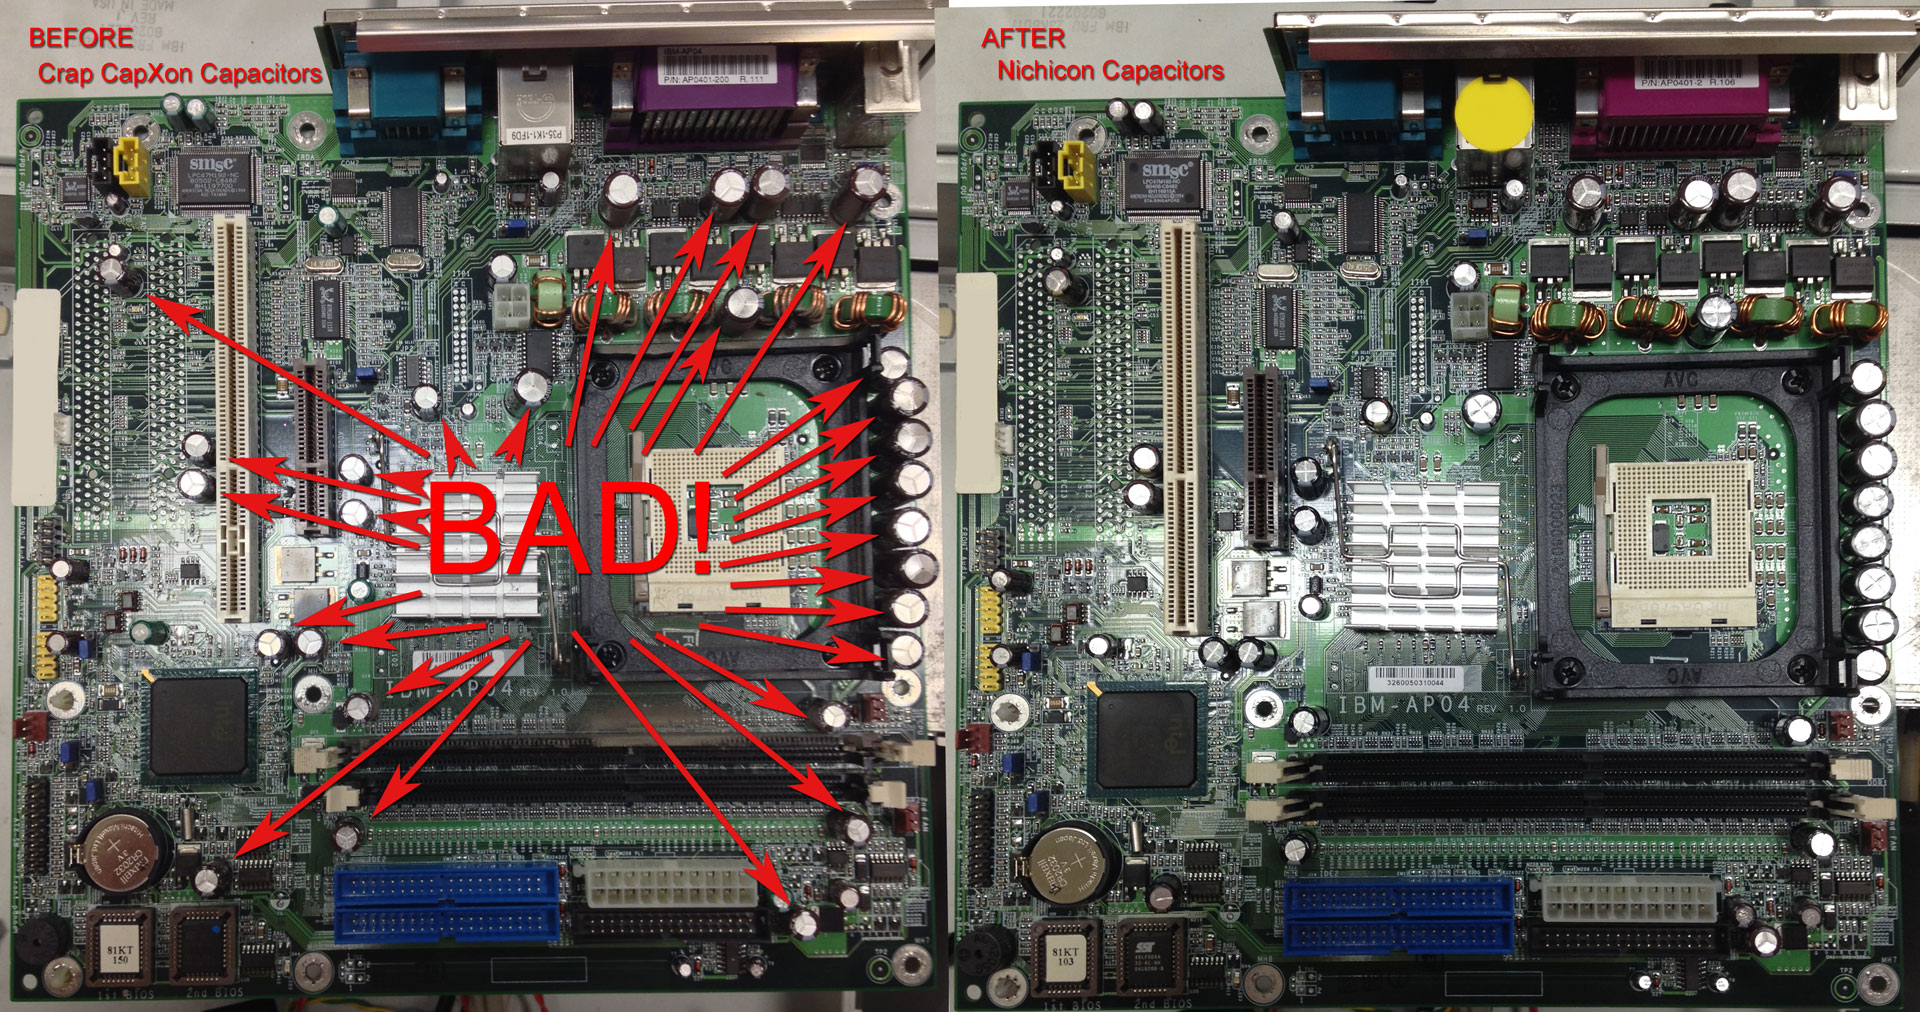 IBM-AP04 SurePOS motherboard before and after capacitor replacement